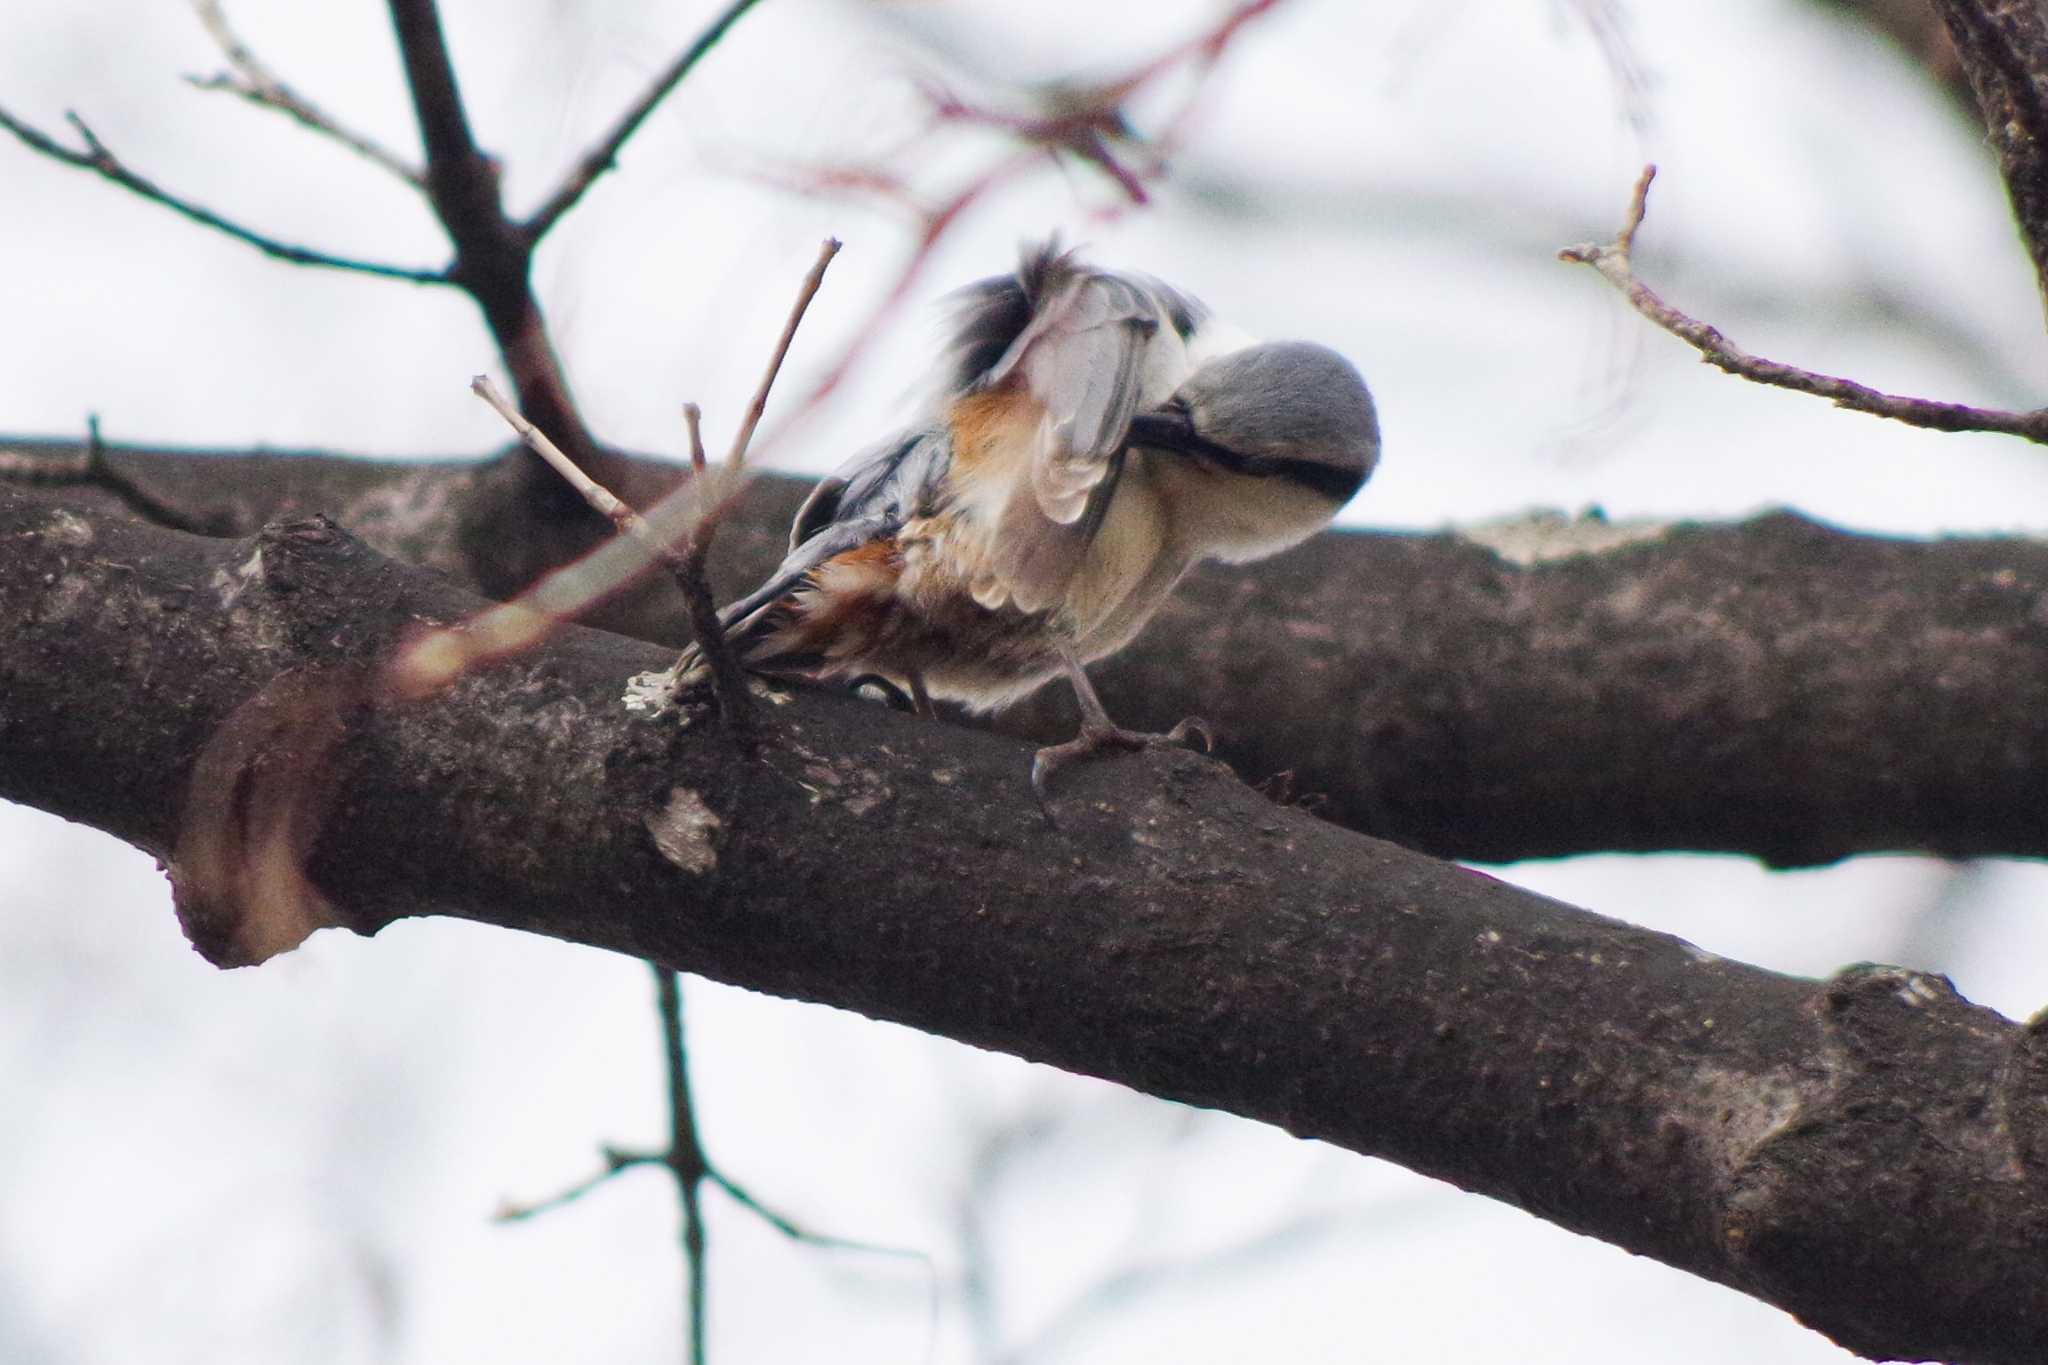 Photo of Eurasian Nuthatch(asiatica) at 西野緑道(札幌市西区) by 98_Ark (98ｱｰｸ)